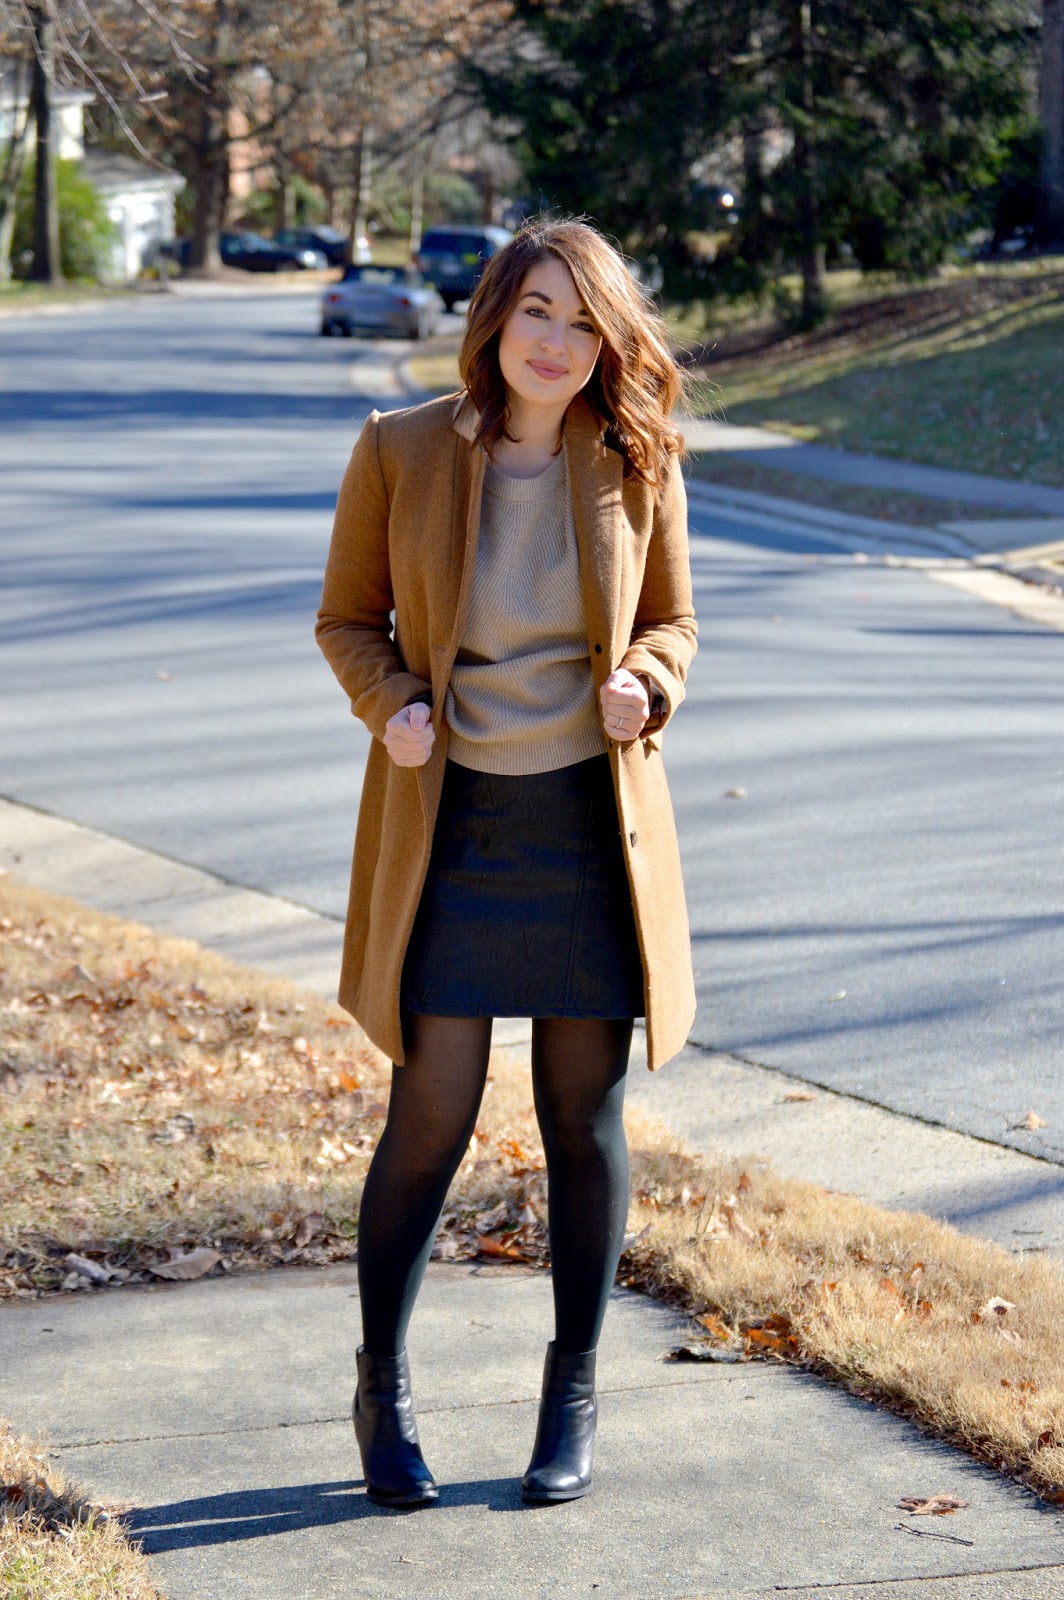 Rosy Outlook: Styling a Skirt for Winter + FF Link-Up!